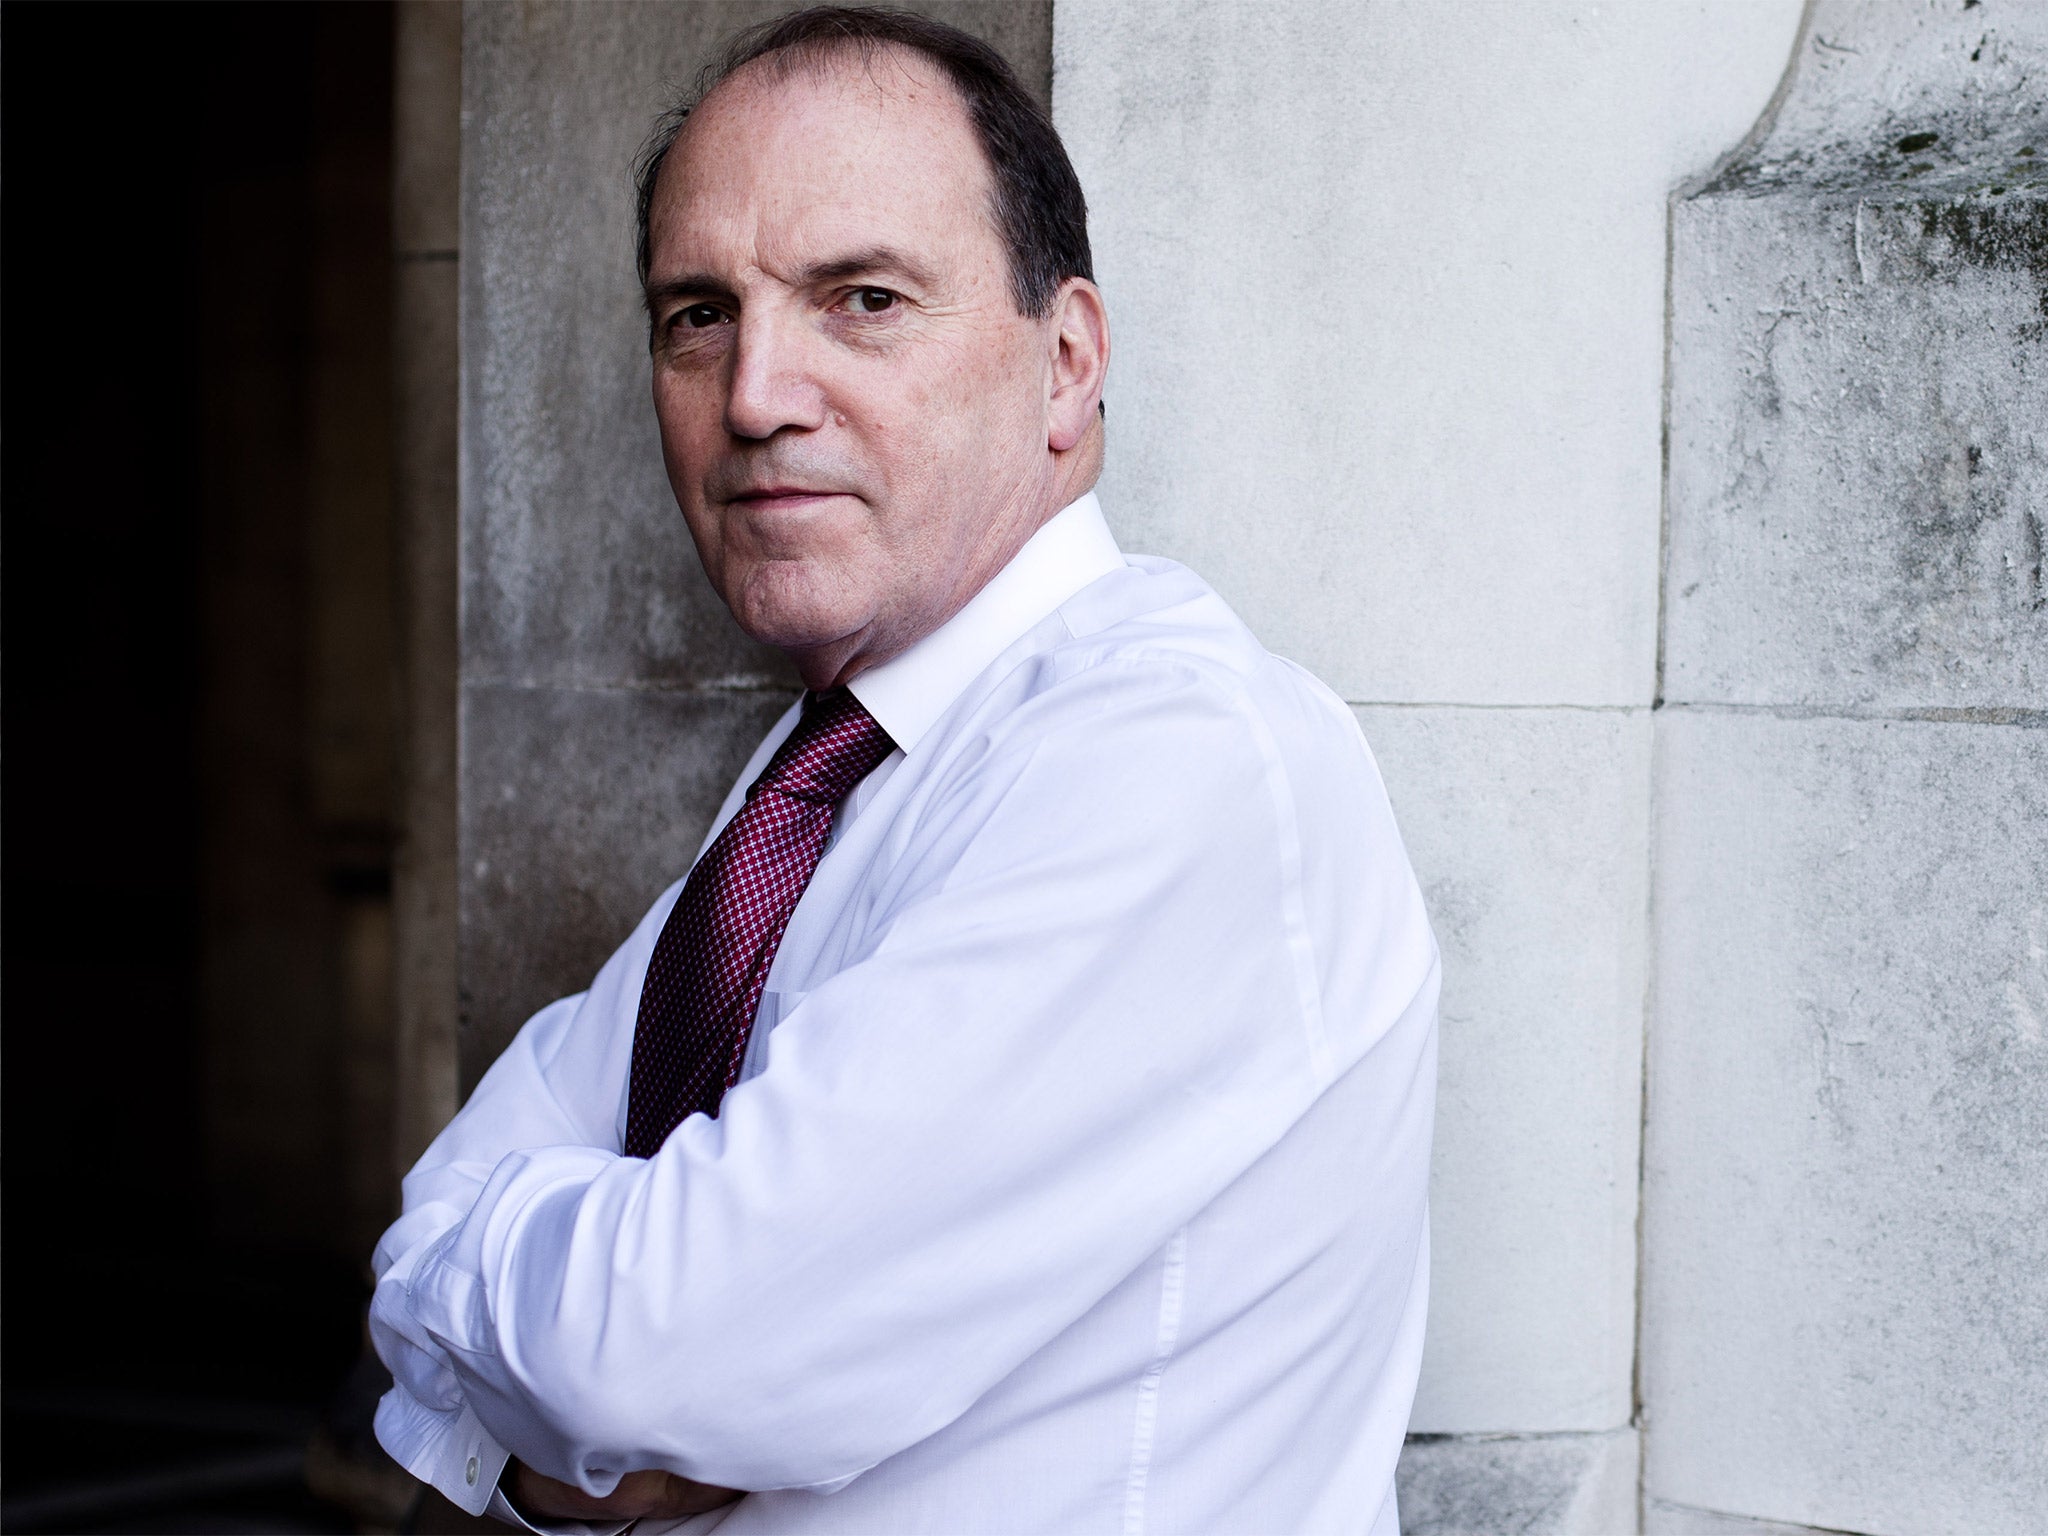 Simon Hughes has been at the Ministry of Justice for 11 months